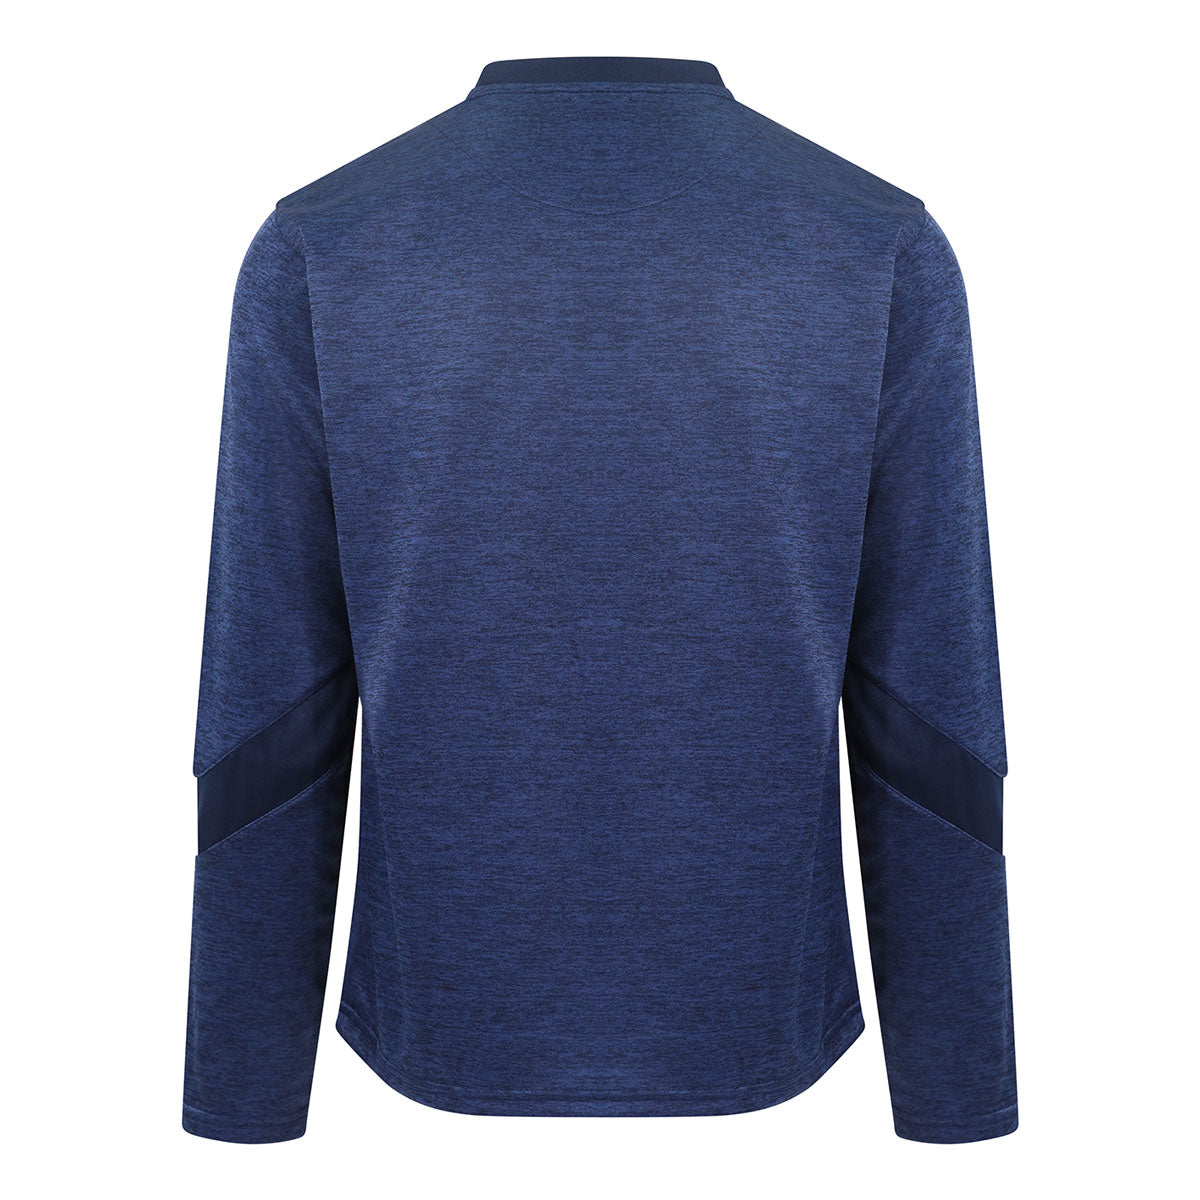 Mc Keever Gaelic Games Europe Core 22 Sweat Top - Adult - Navy